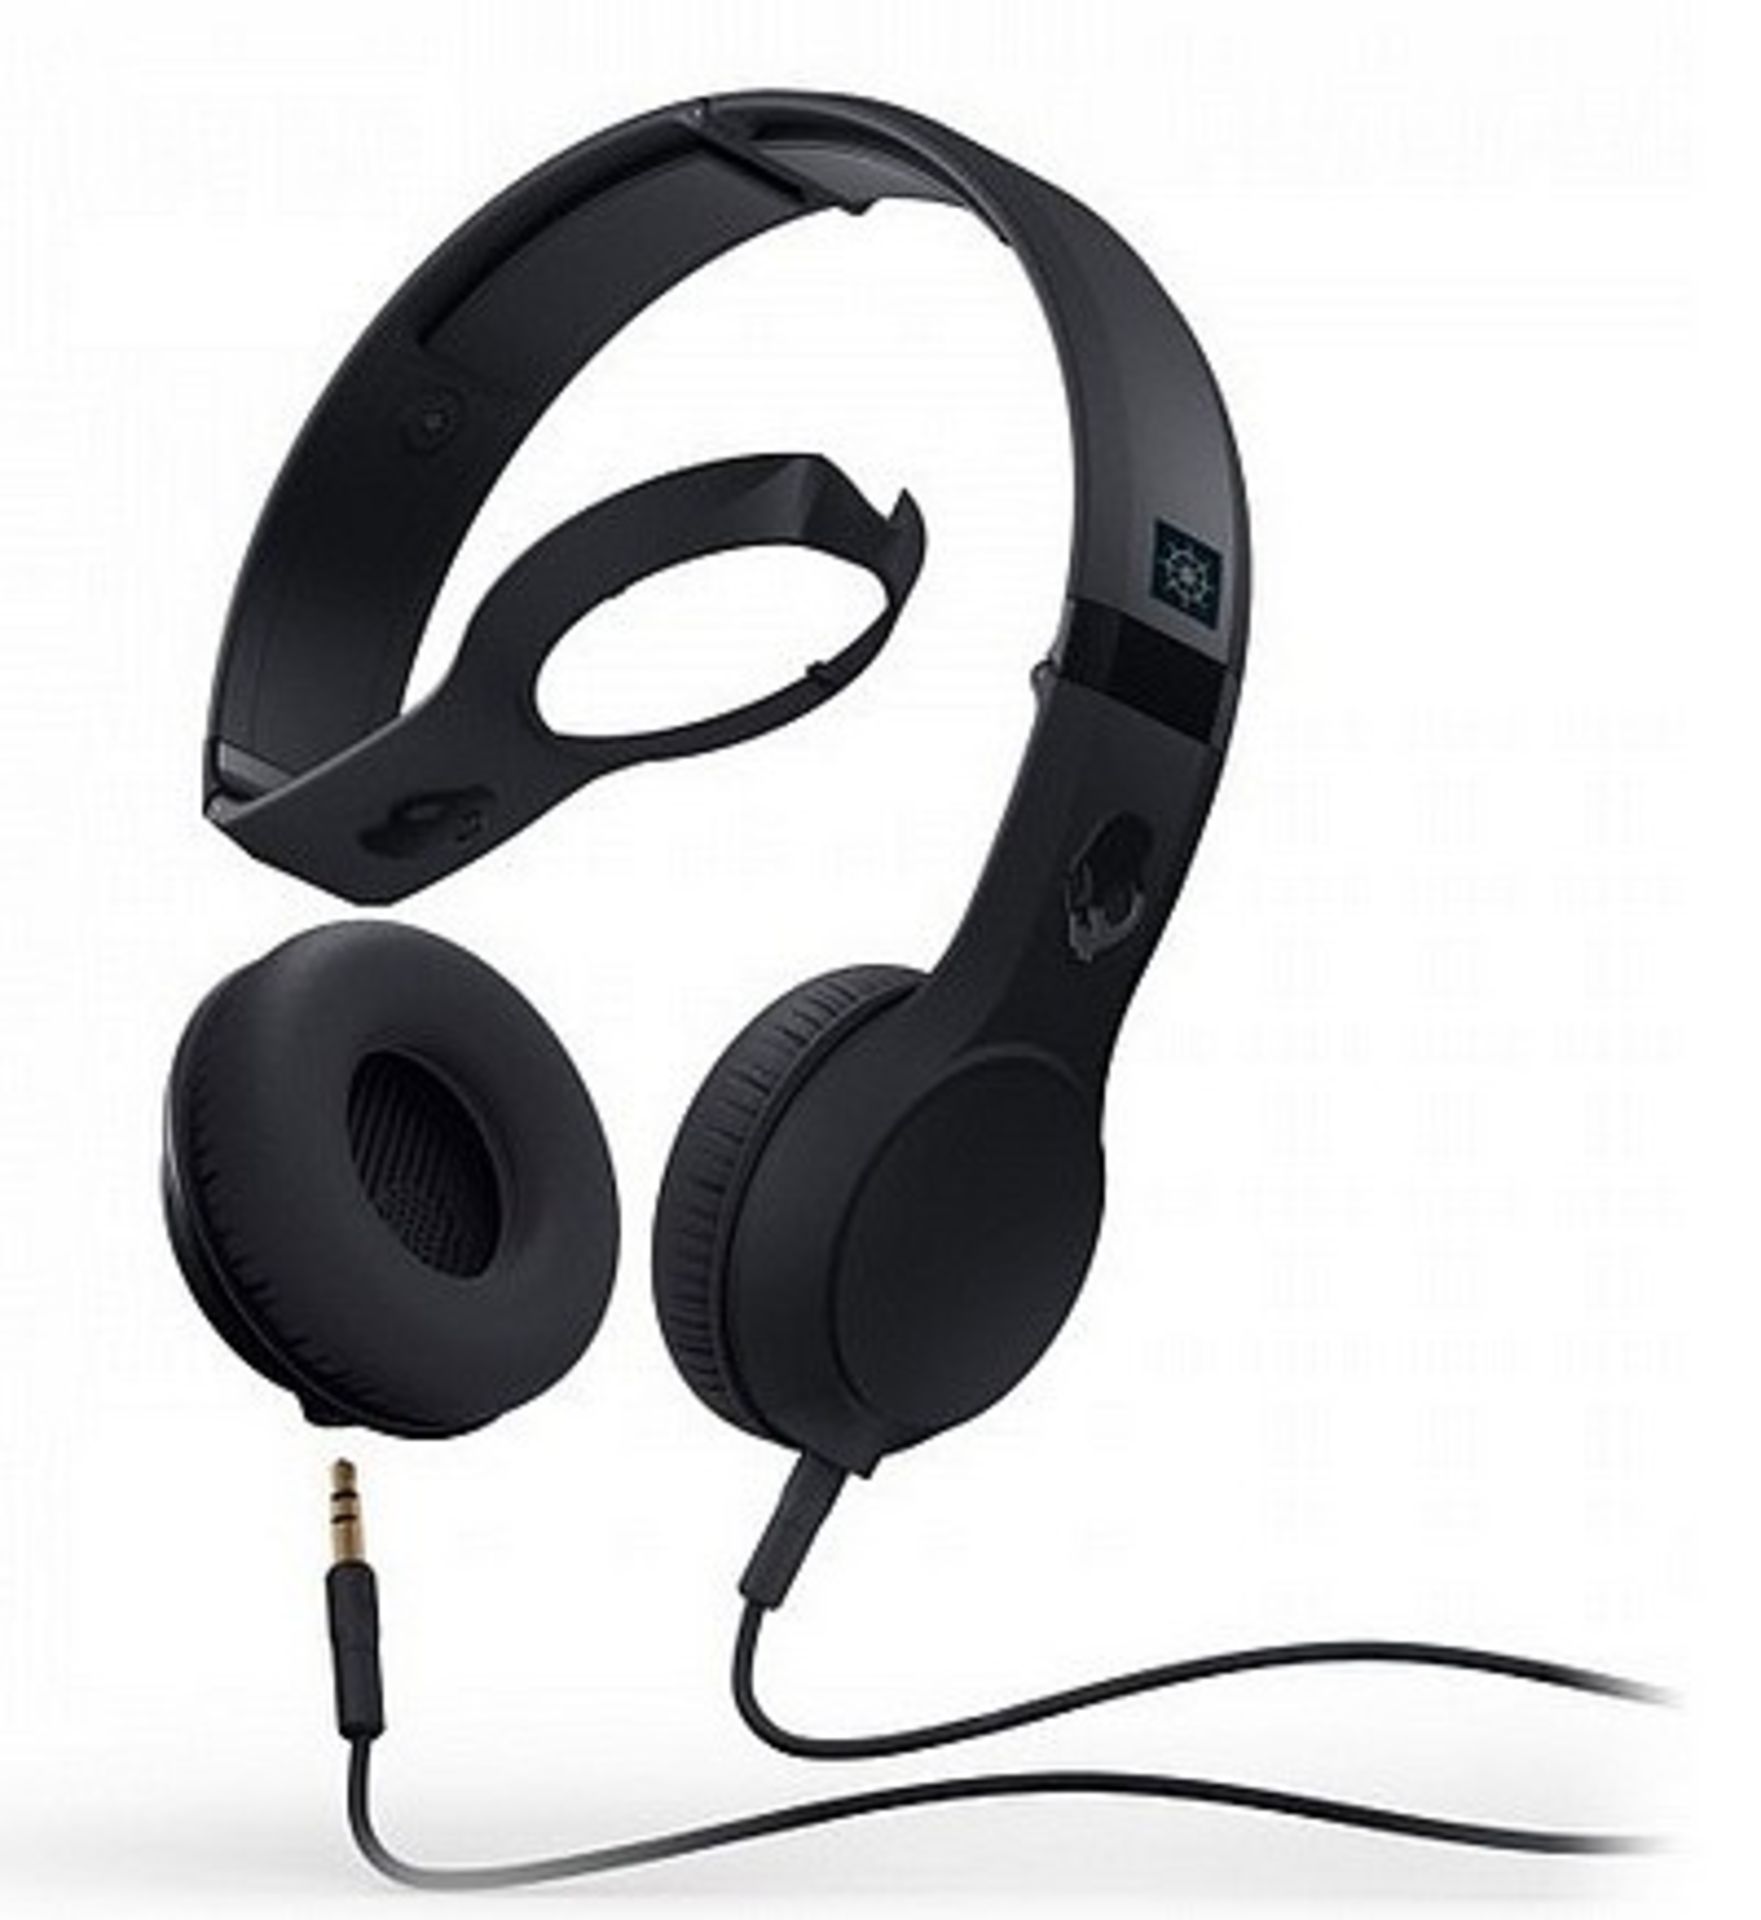 V Brand New Skullcandy Cassette Headphones - With Mic and Remote - Interchangeable Ear Pillows -